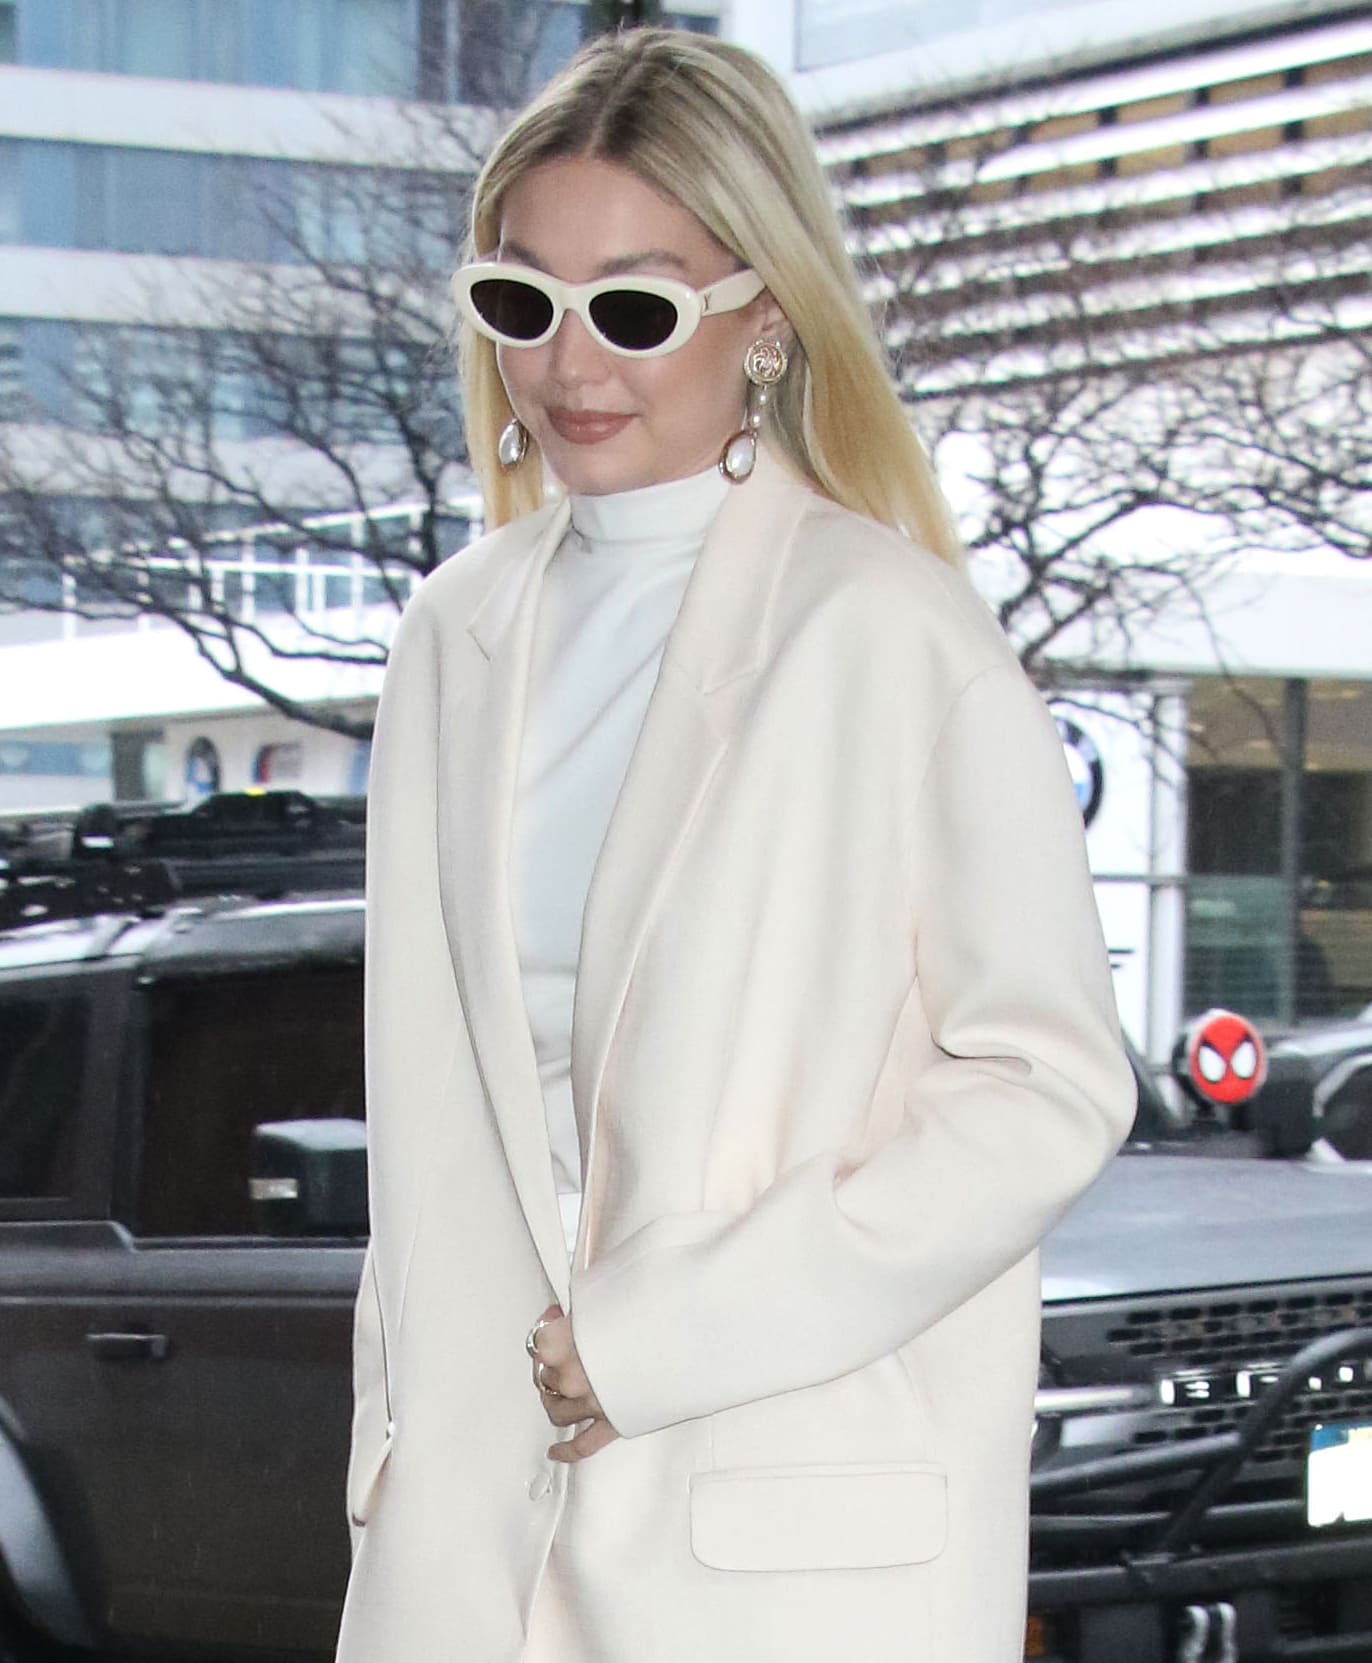 Gigi Hadid completes her ethereal white look with retro-framed oval sunglasses and Lionheart jewelry